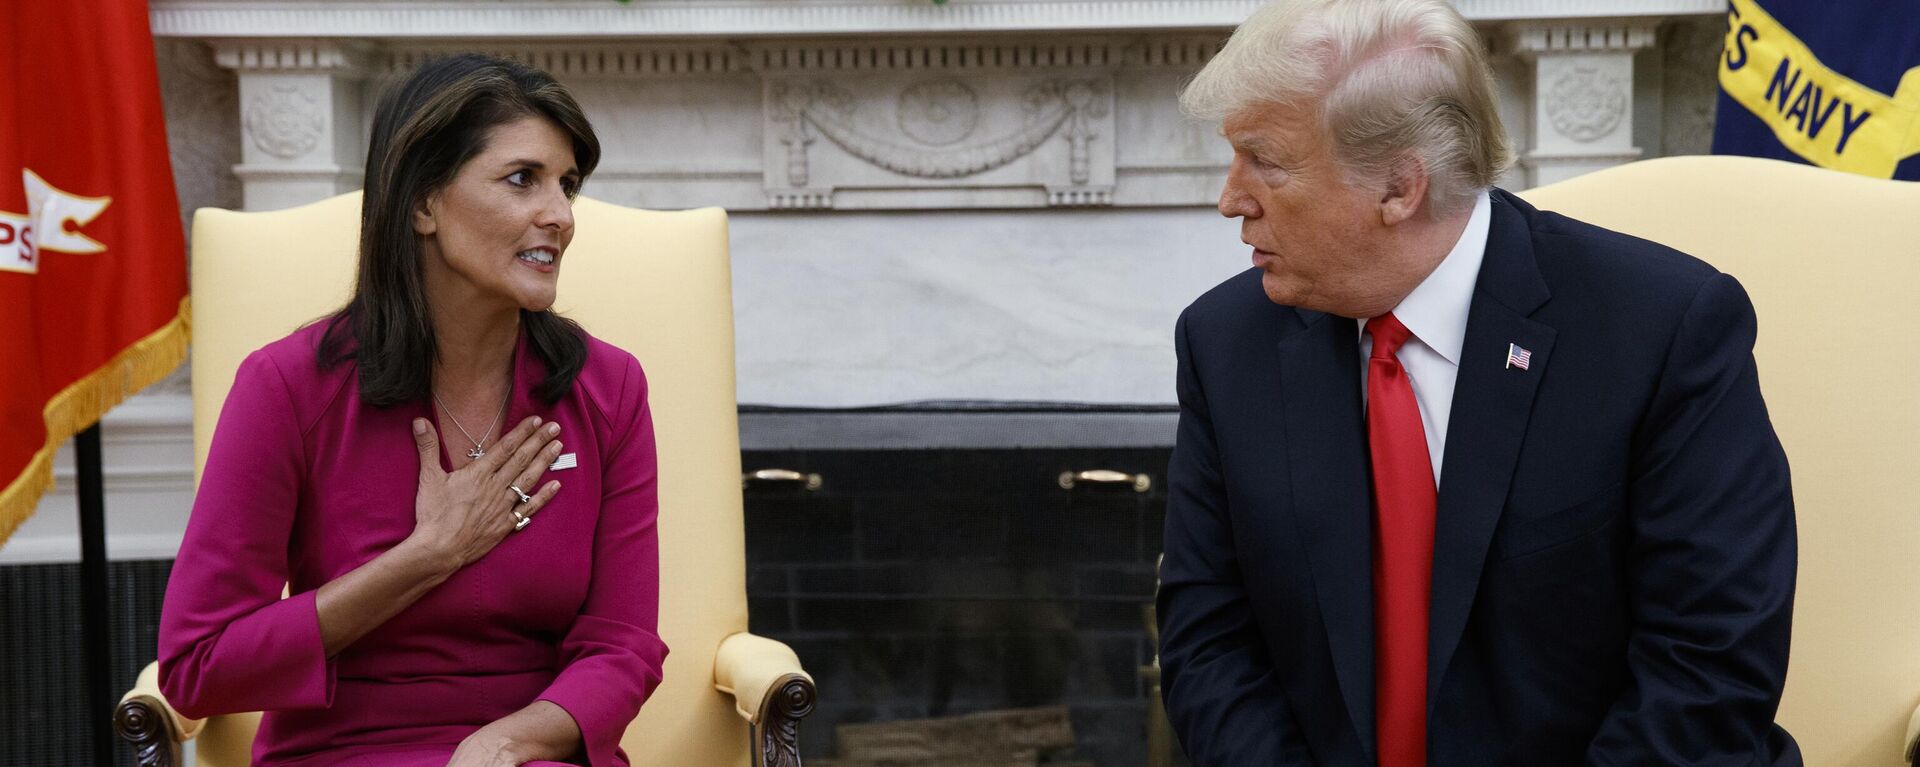 President Donald Trump meets with outgoing U.S. Ambassador to the United Nations Nikki Haley in the Oval Office of the White House, Tuesday, Oct. 9, 2018, in Washington. - Sputnik International, 1920, 22.12.2023